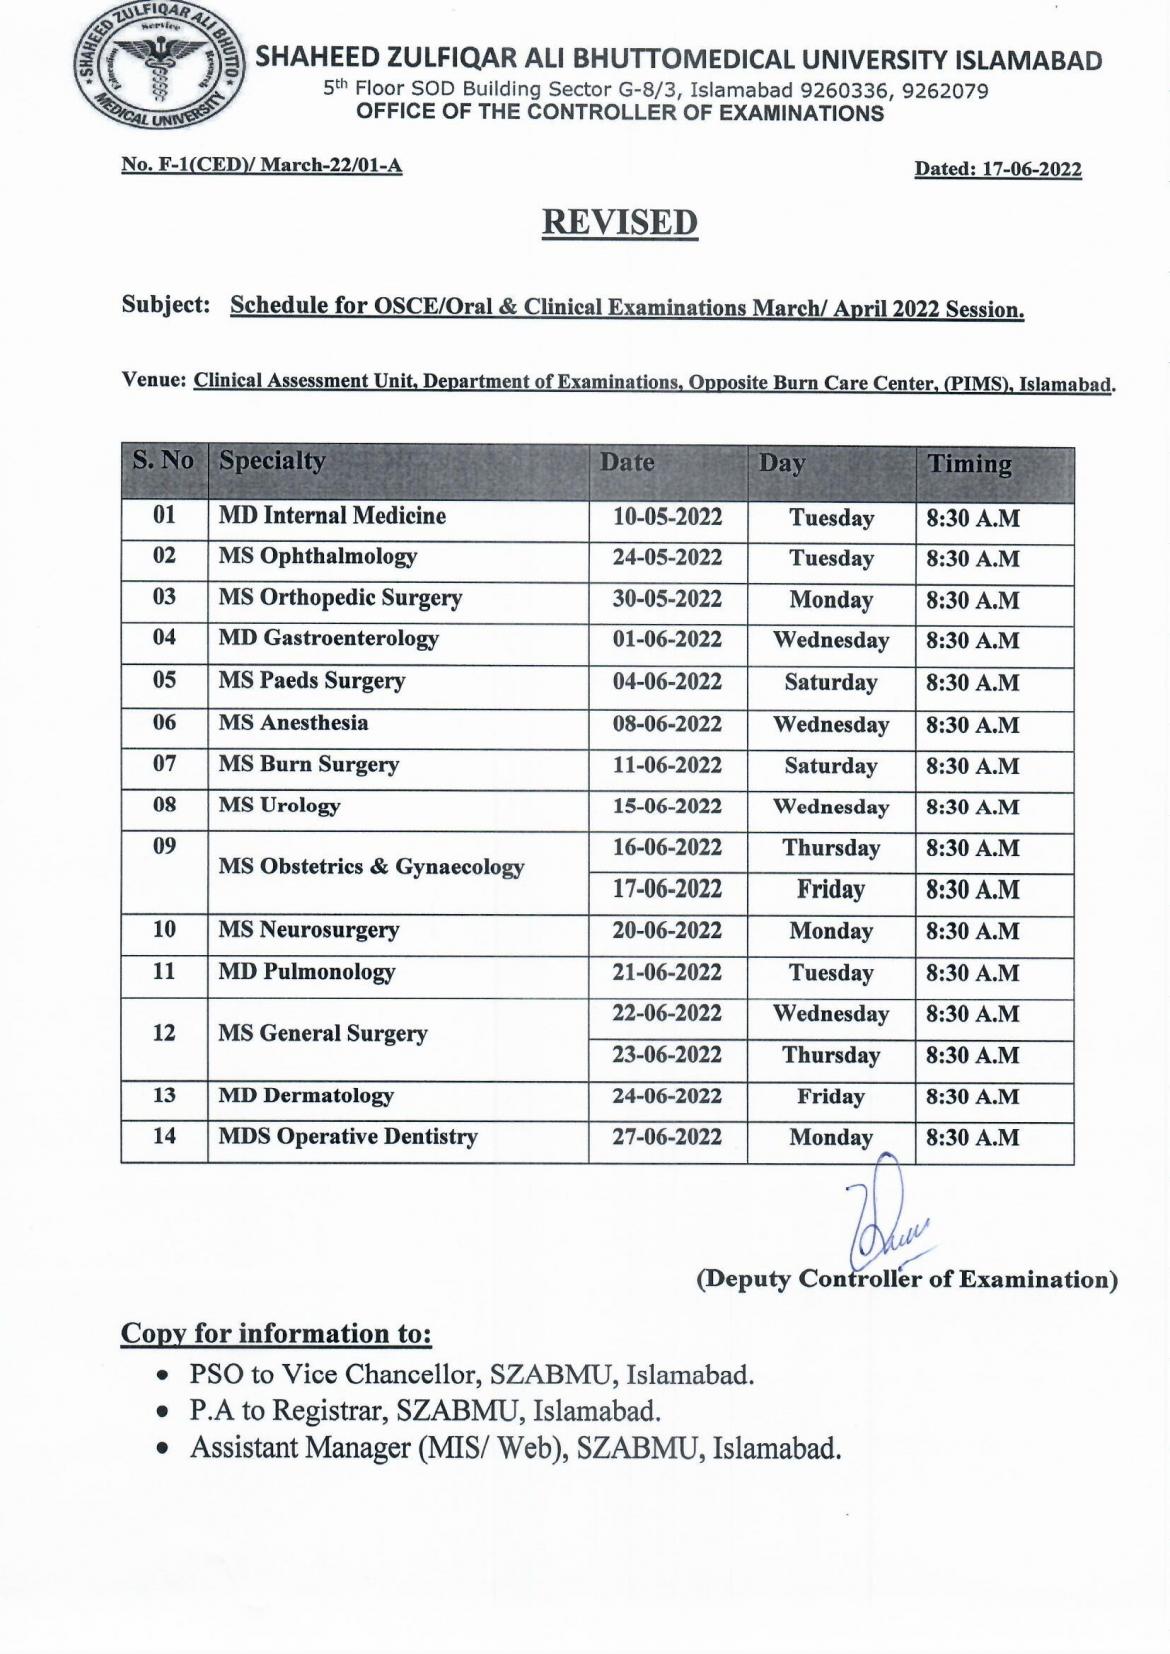 Revised - Schedule for OSCE/Oral & Clinical Examinations March/April 2022